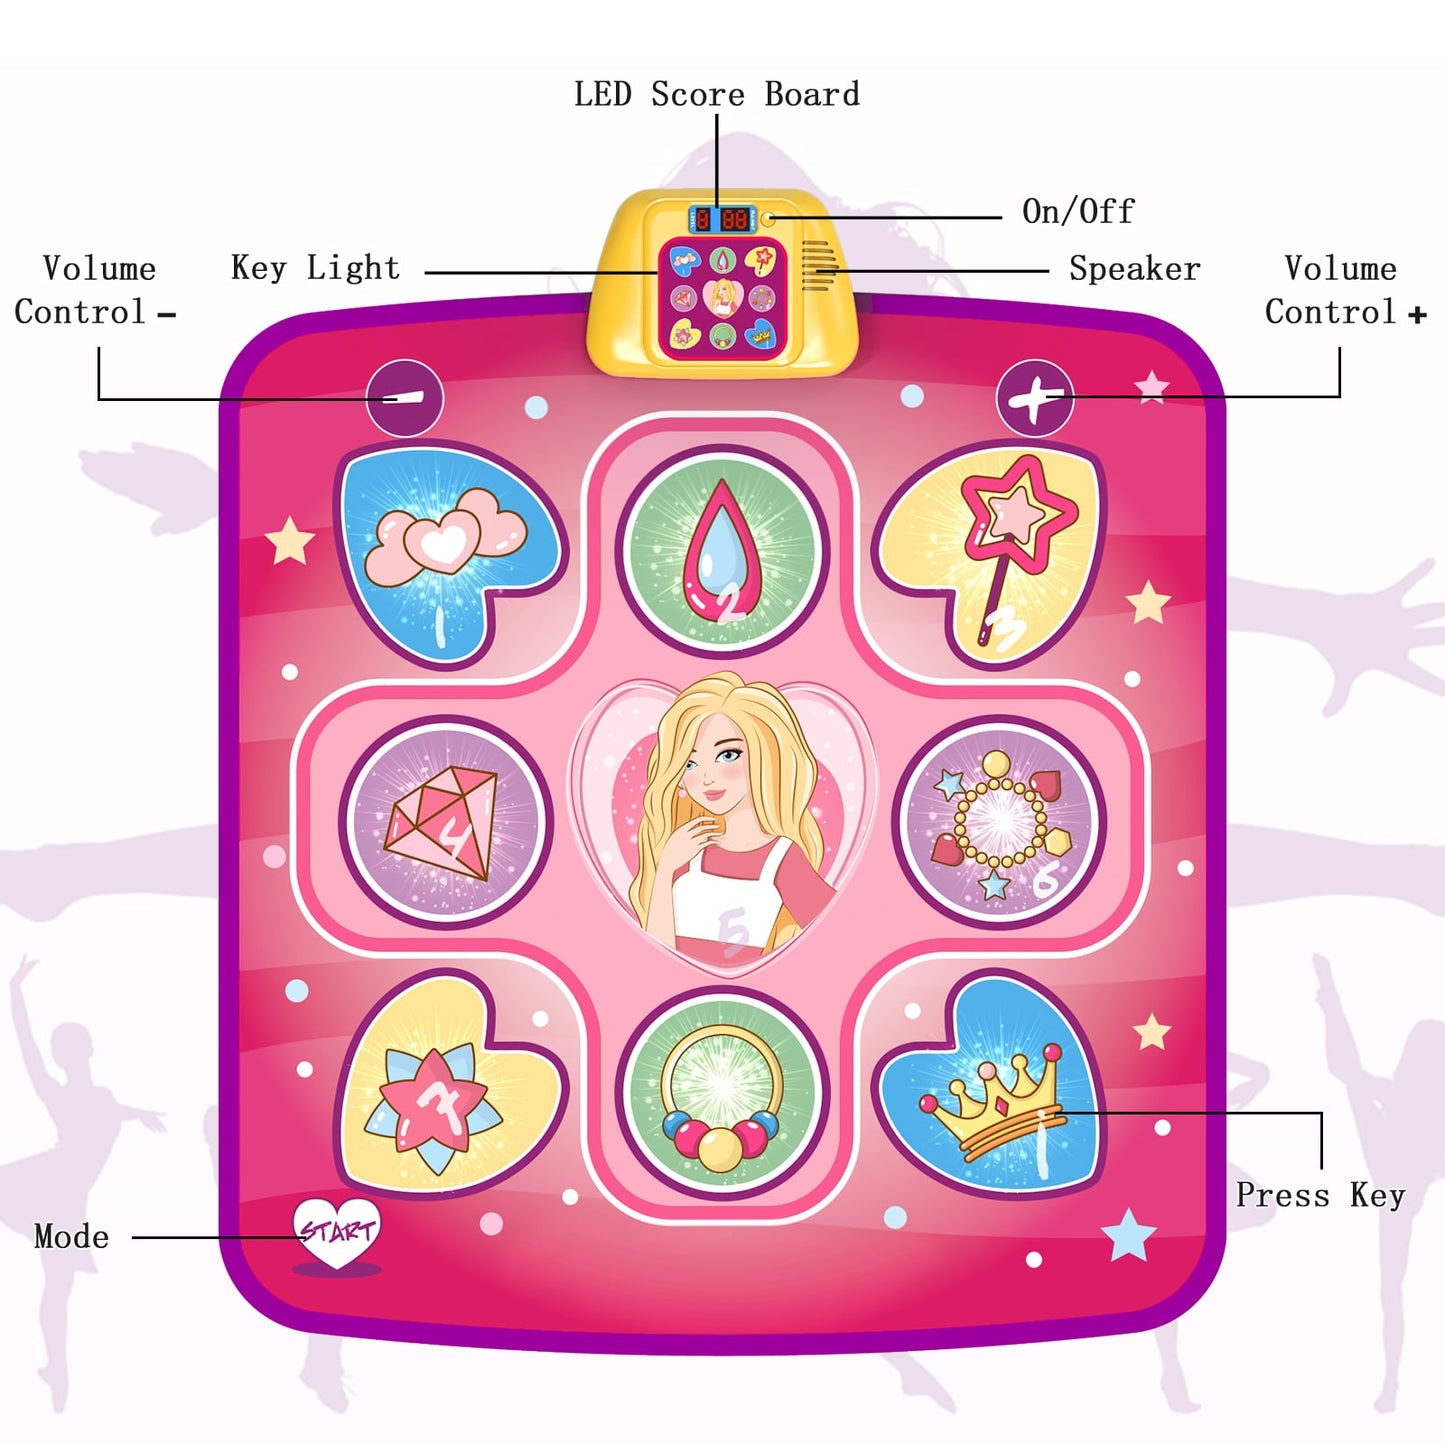 Dance Mat for Kids, 5 Modes Dance Pad Musical Educational Toy Gifts for Little Girls Boys Aged 3+